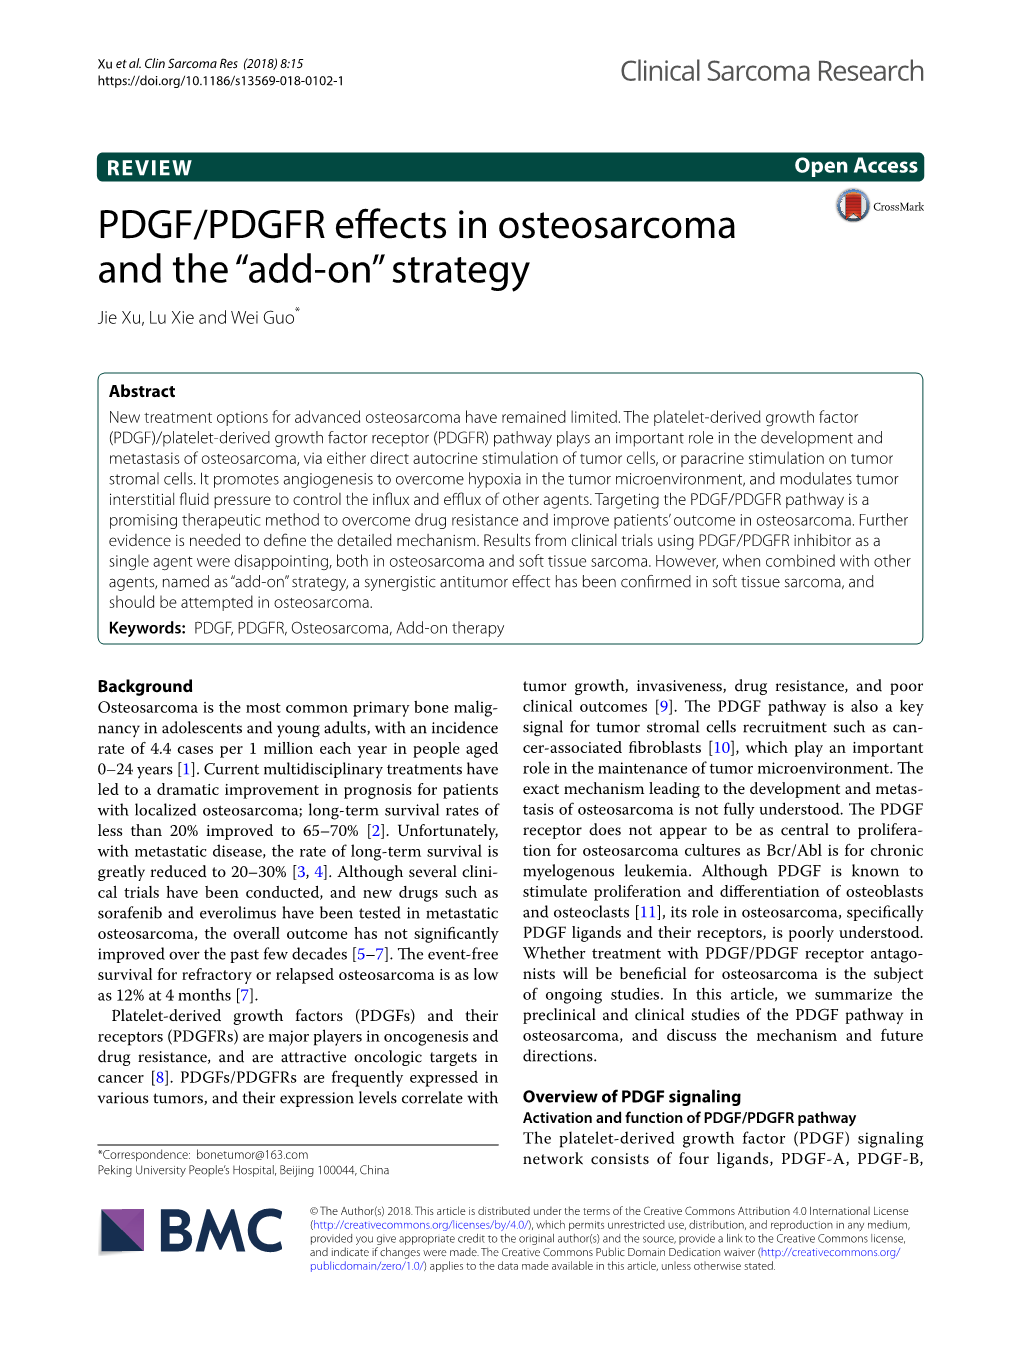 PDGF/PDGFR Effects in Osteosarcoma and the “Add-On” Strategy